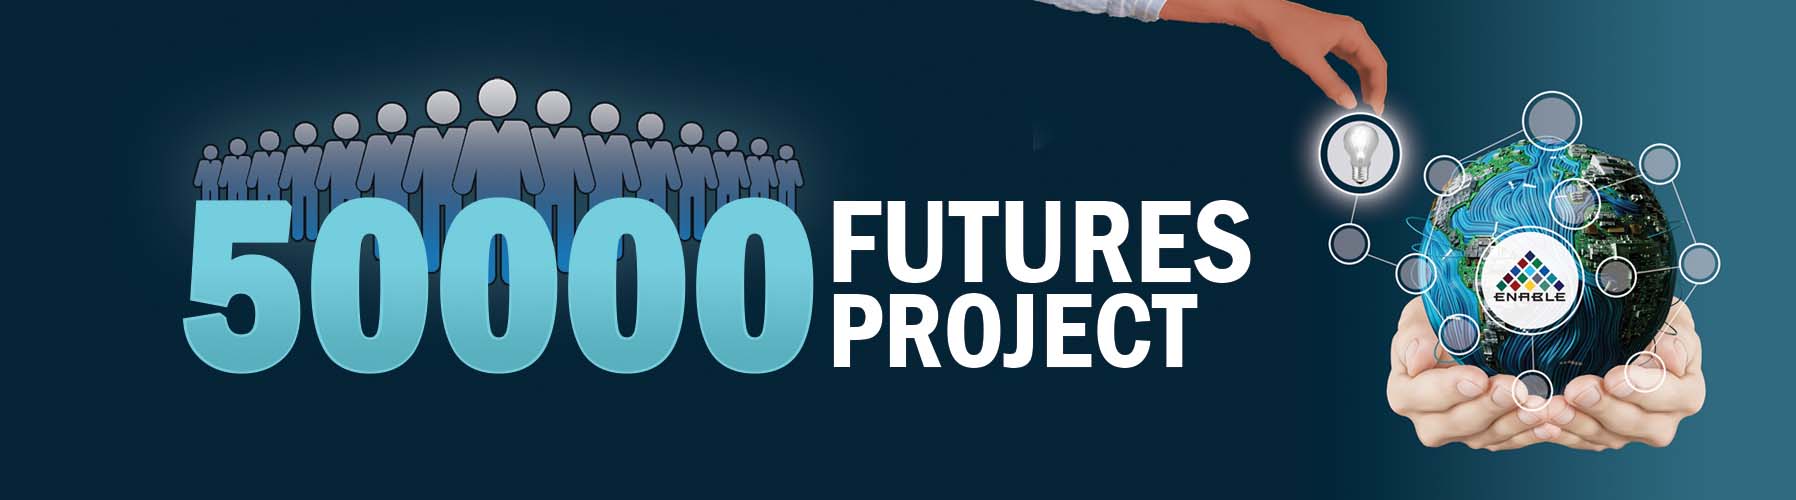 ENABLE 50000 Futures Conference 2021 